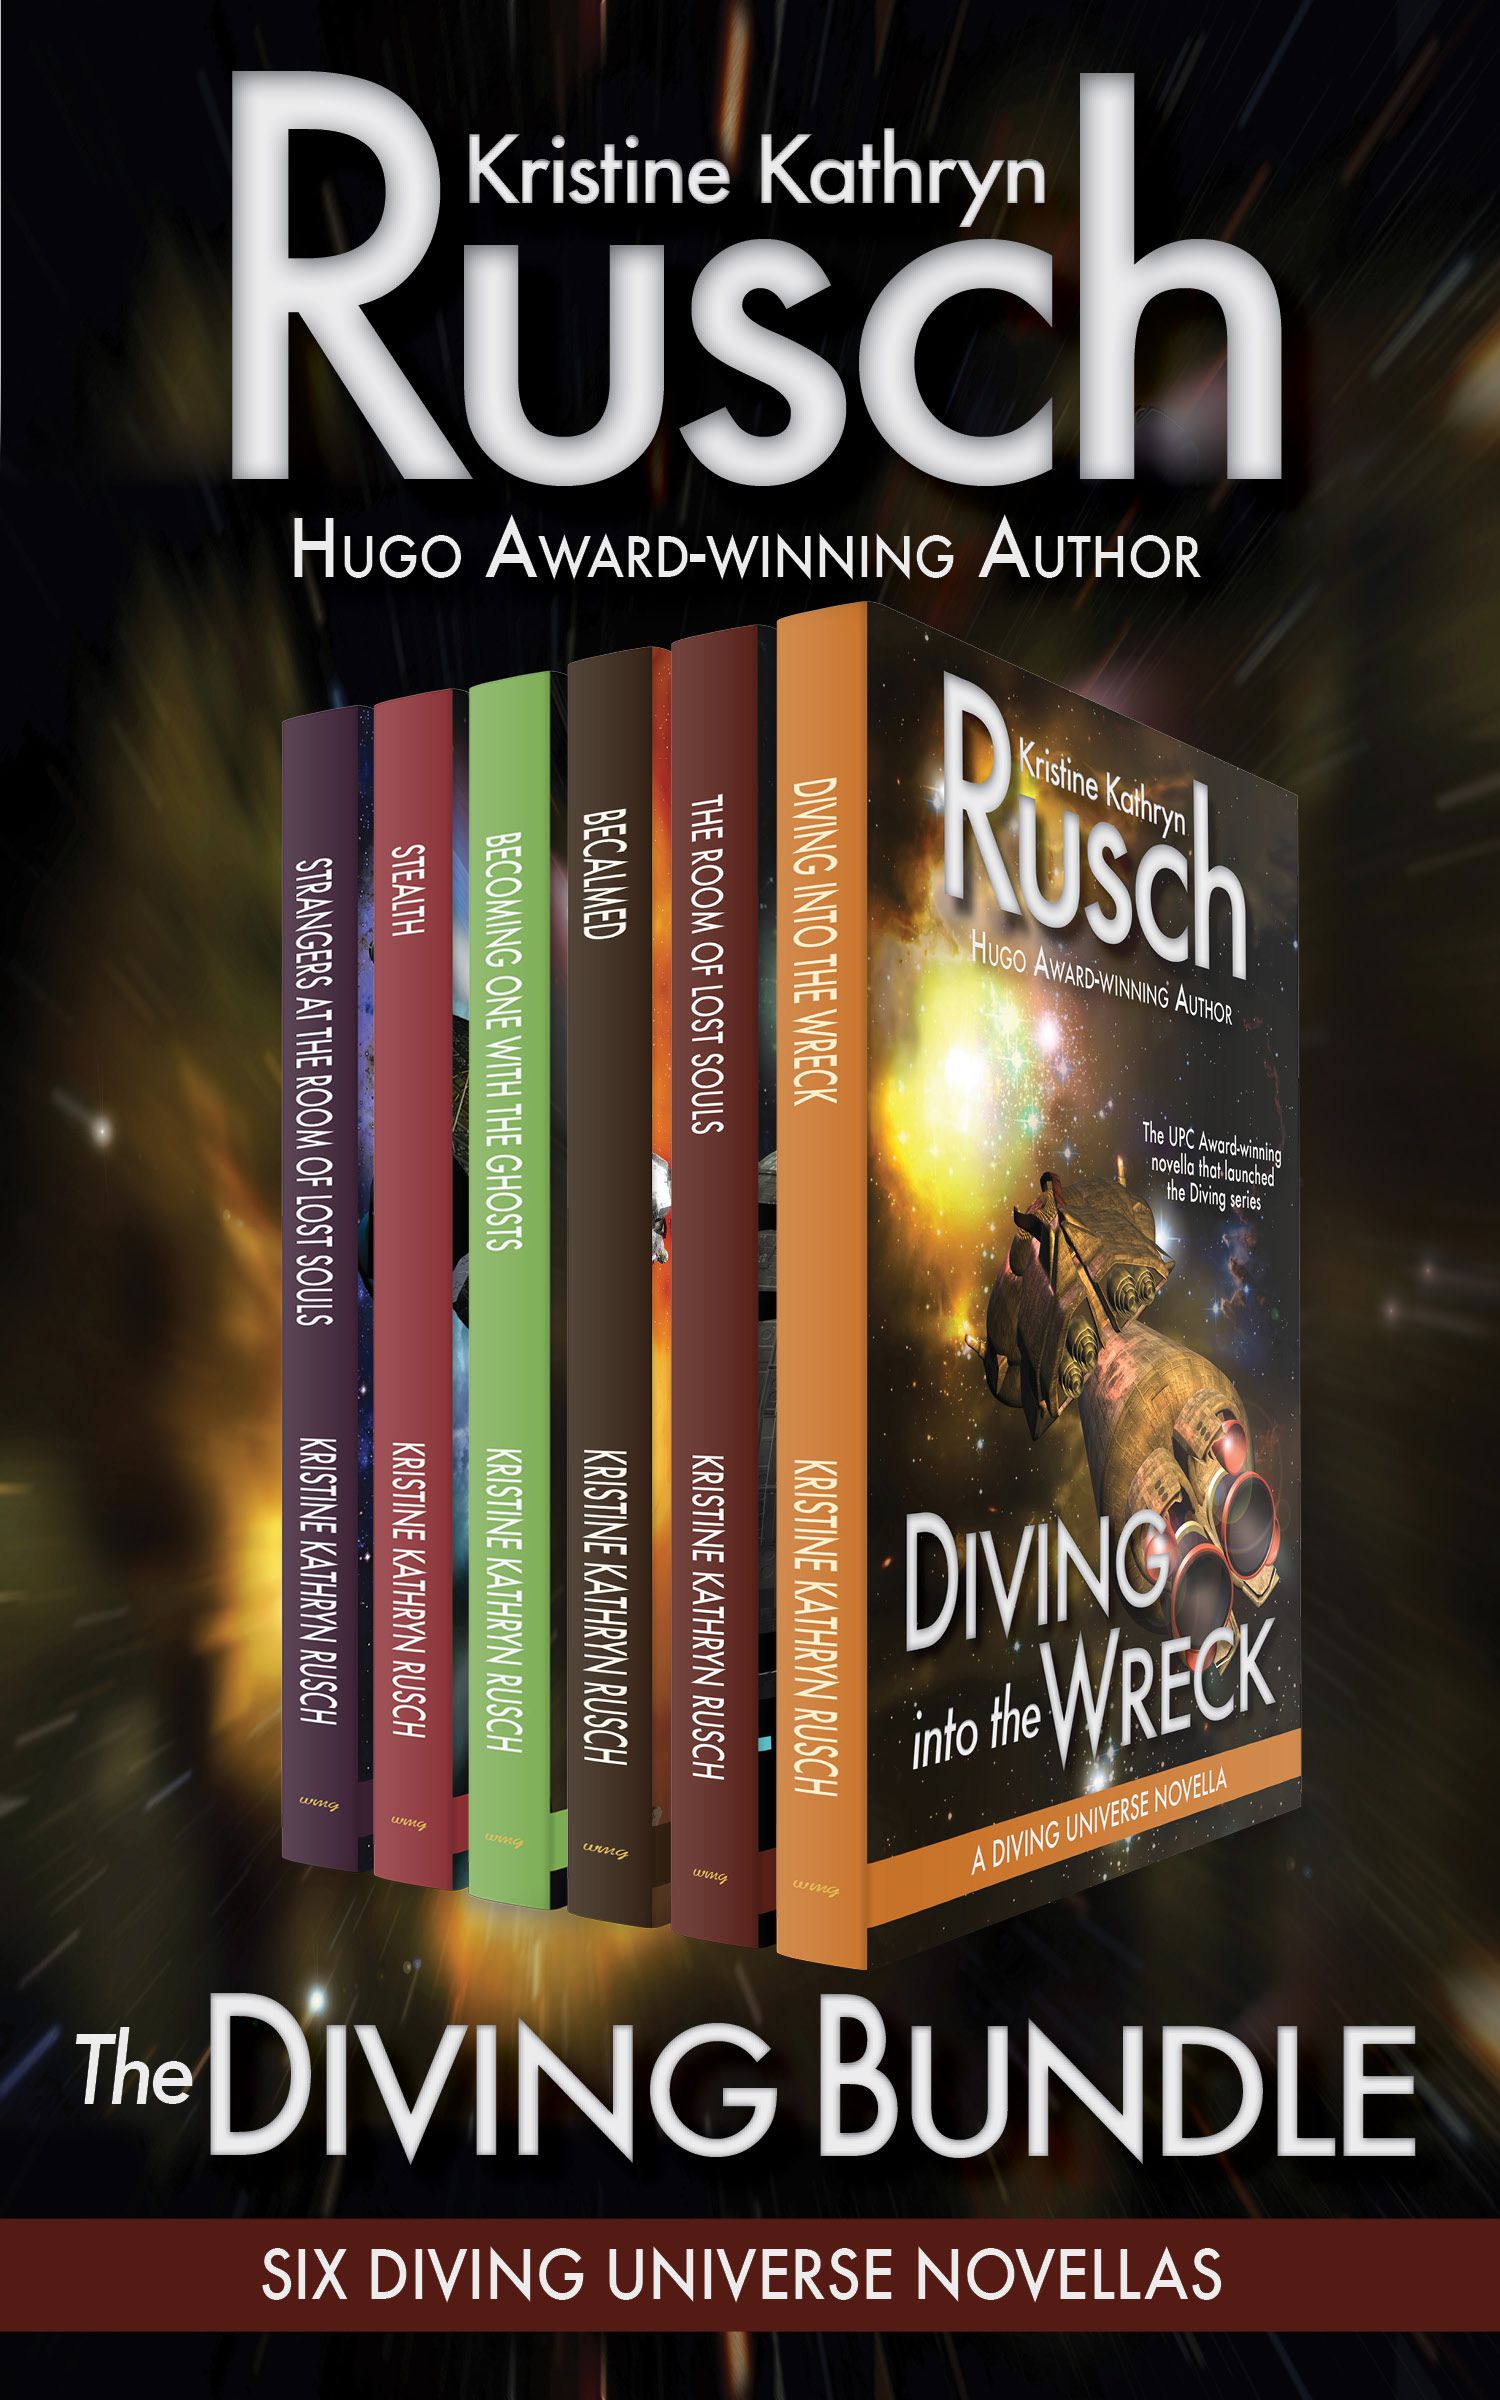 The Diving Bundle: Six Diving Universe Novellas (2013) by Kristine Kathryn Rusch